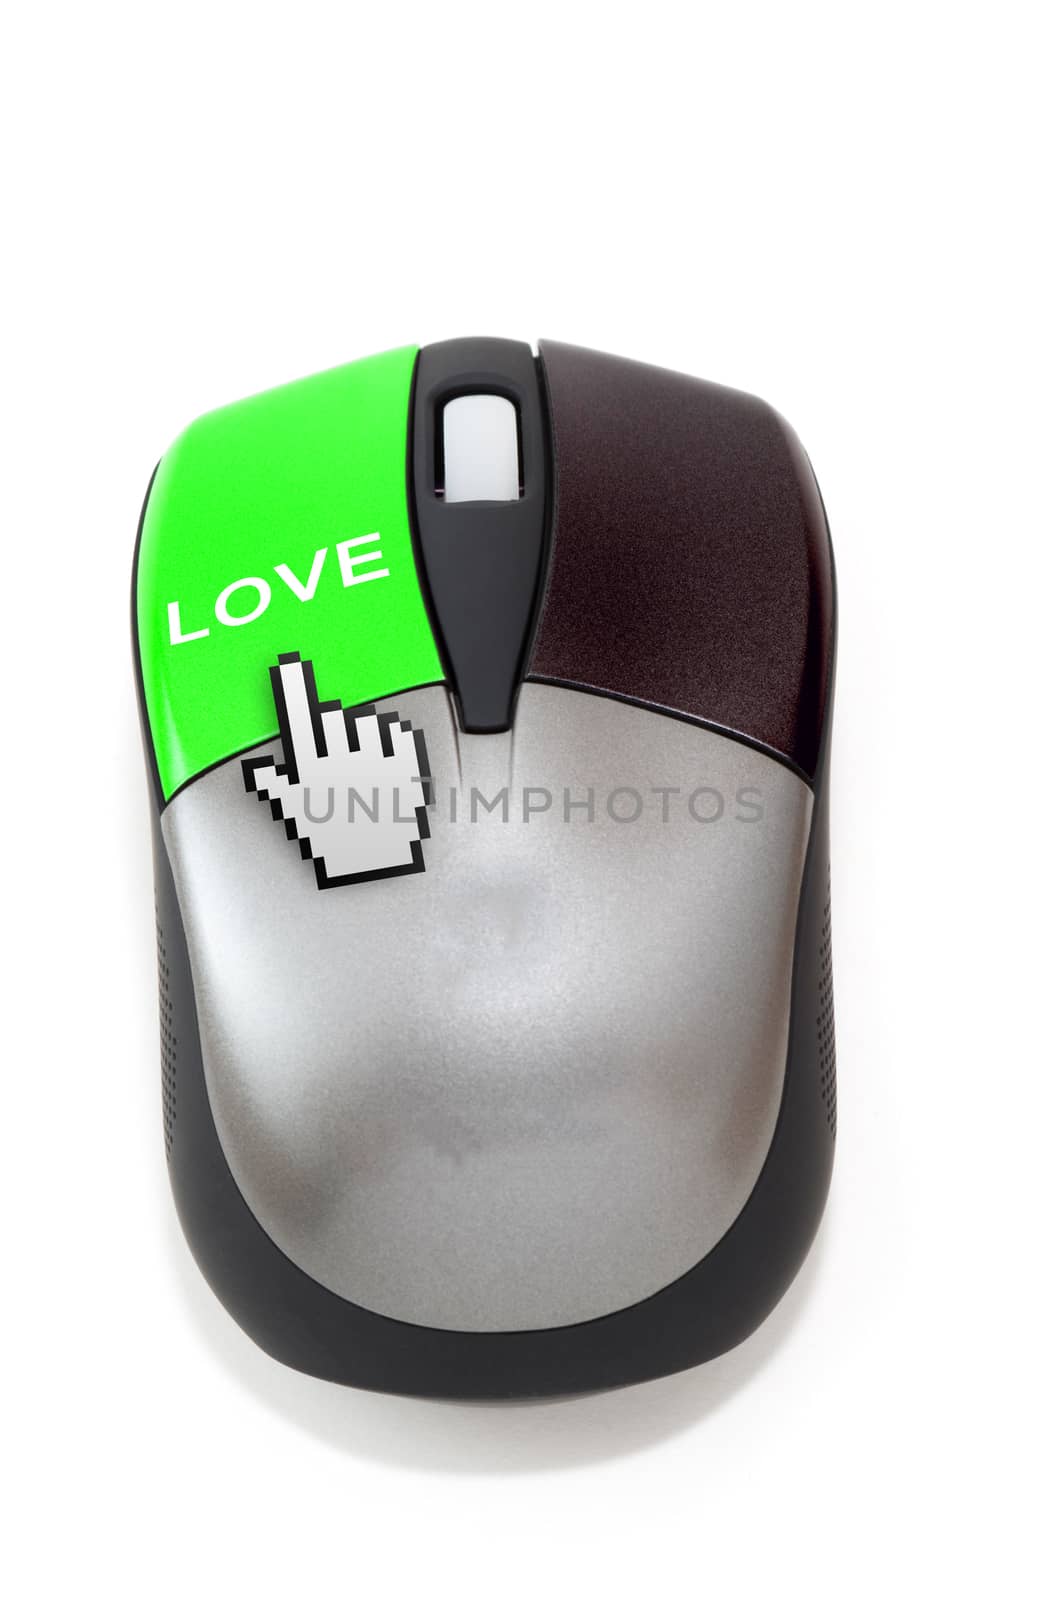 Hand cursor clicking on love button